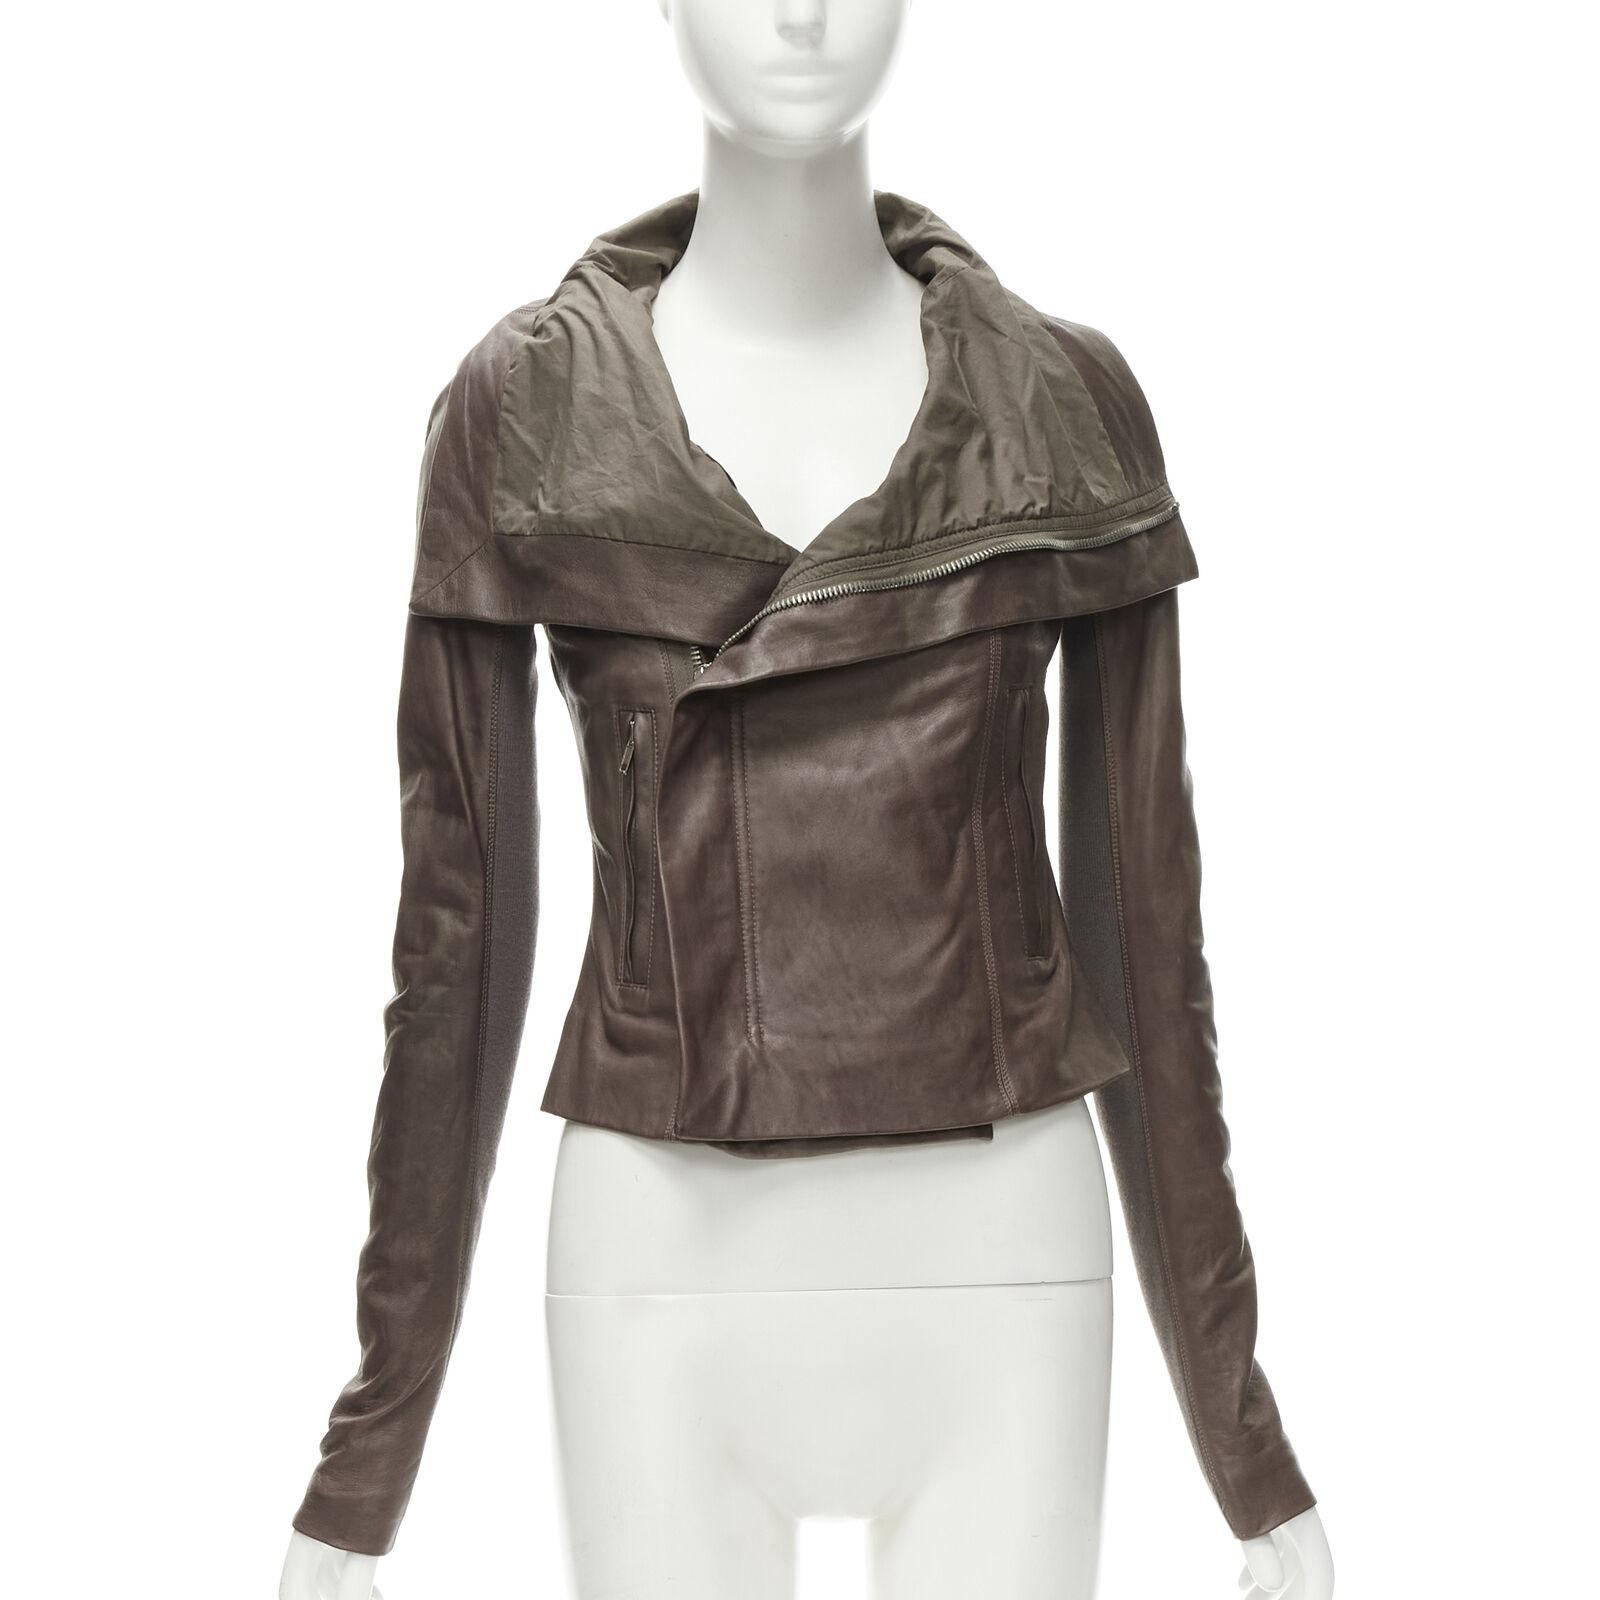 RICK OWENS dust brown lambskin leather draped collar fitted biker jacket IT40 XS
Reference: LNKO/A02035
Brand: Rick Owens
Designer: Rick Owens
Material: Lambskin Leather
Color: Brown
Pattern: Solid
Closure: Zip
Lining: Fully Lined
Extra Details: DNA